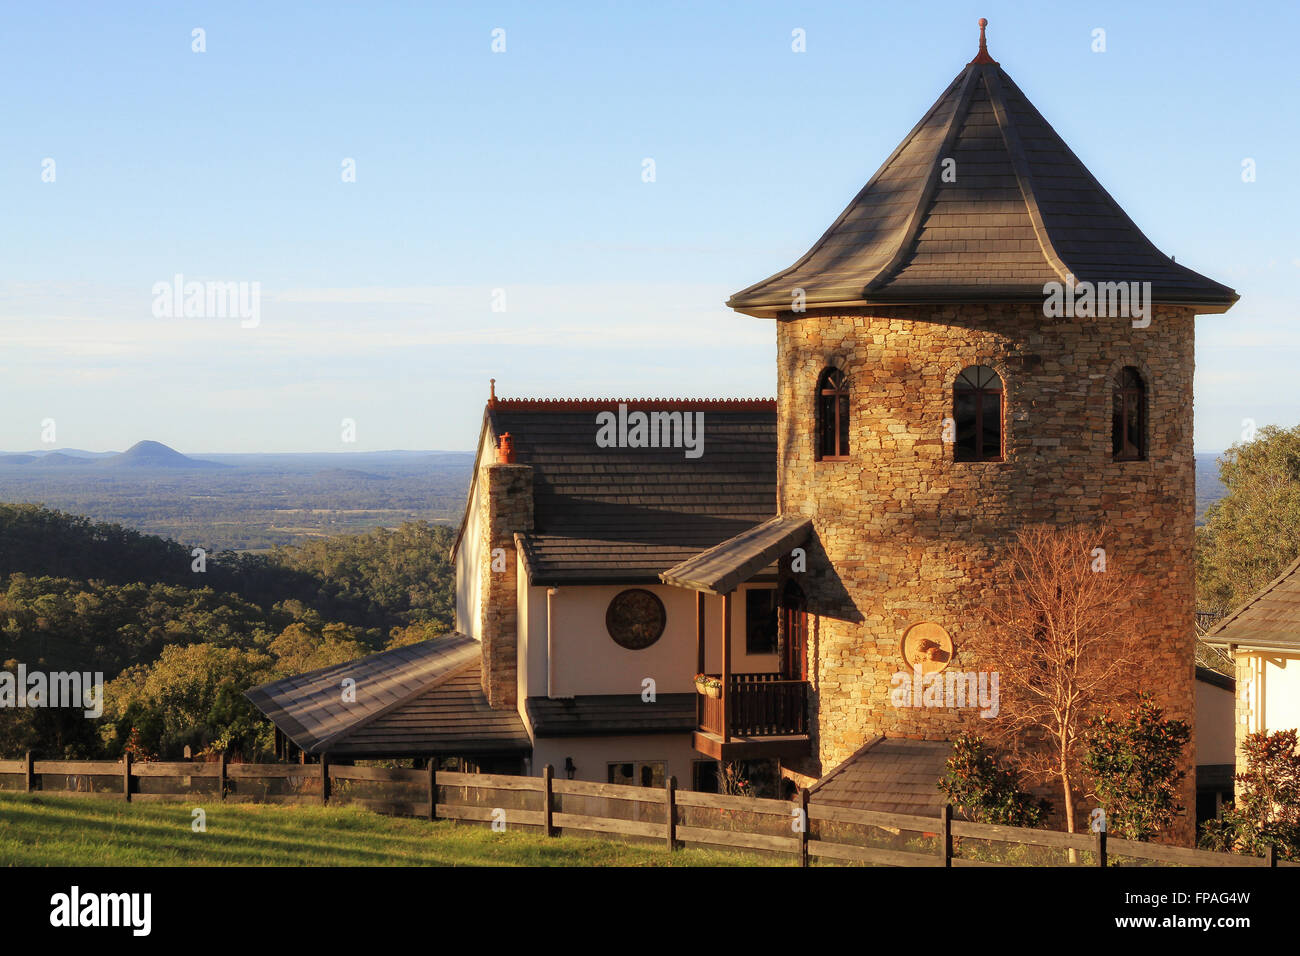 sunlit desirable residence modelled around an oast house  with Glass house mountains in distance, brisbane, queensland australia Stock Photo